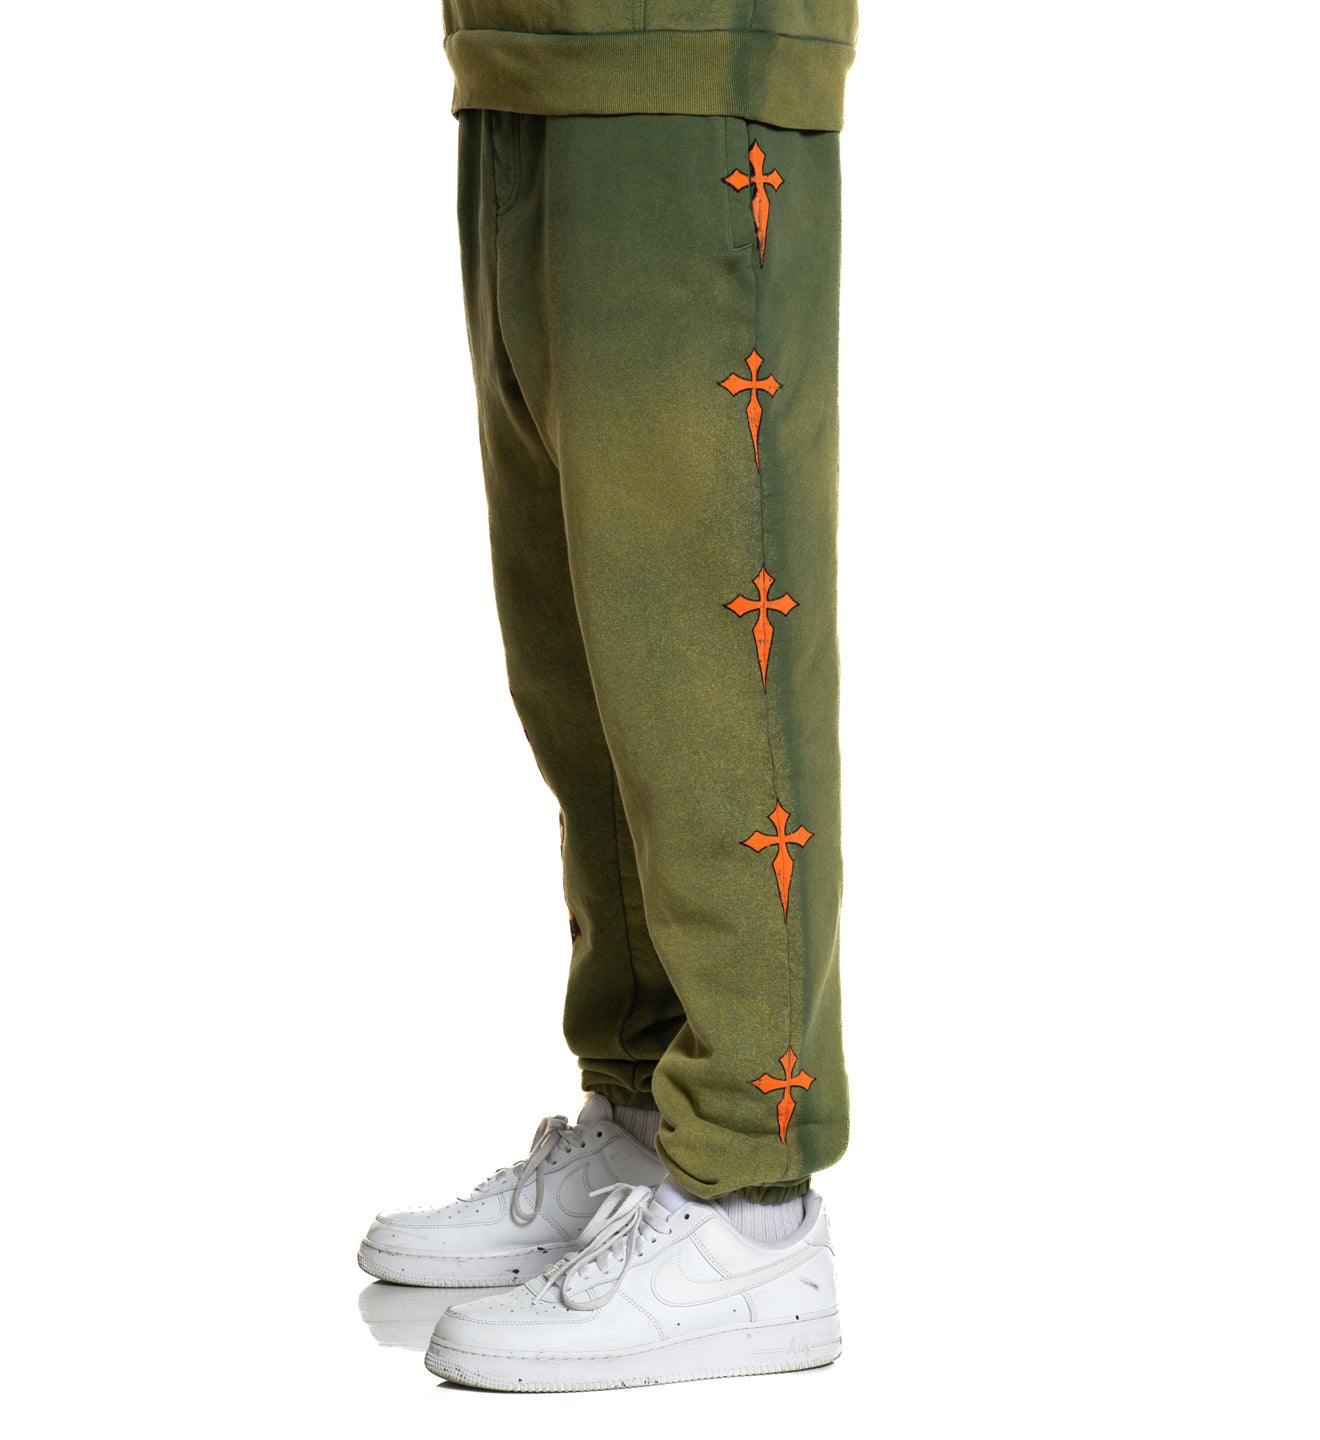 Absolution Sweatpant